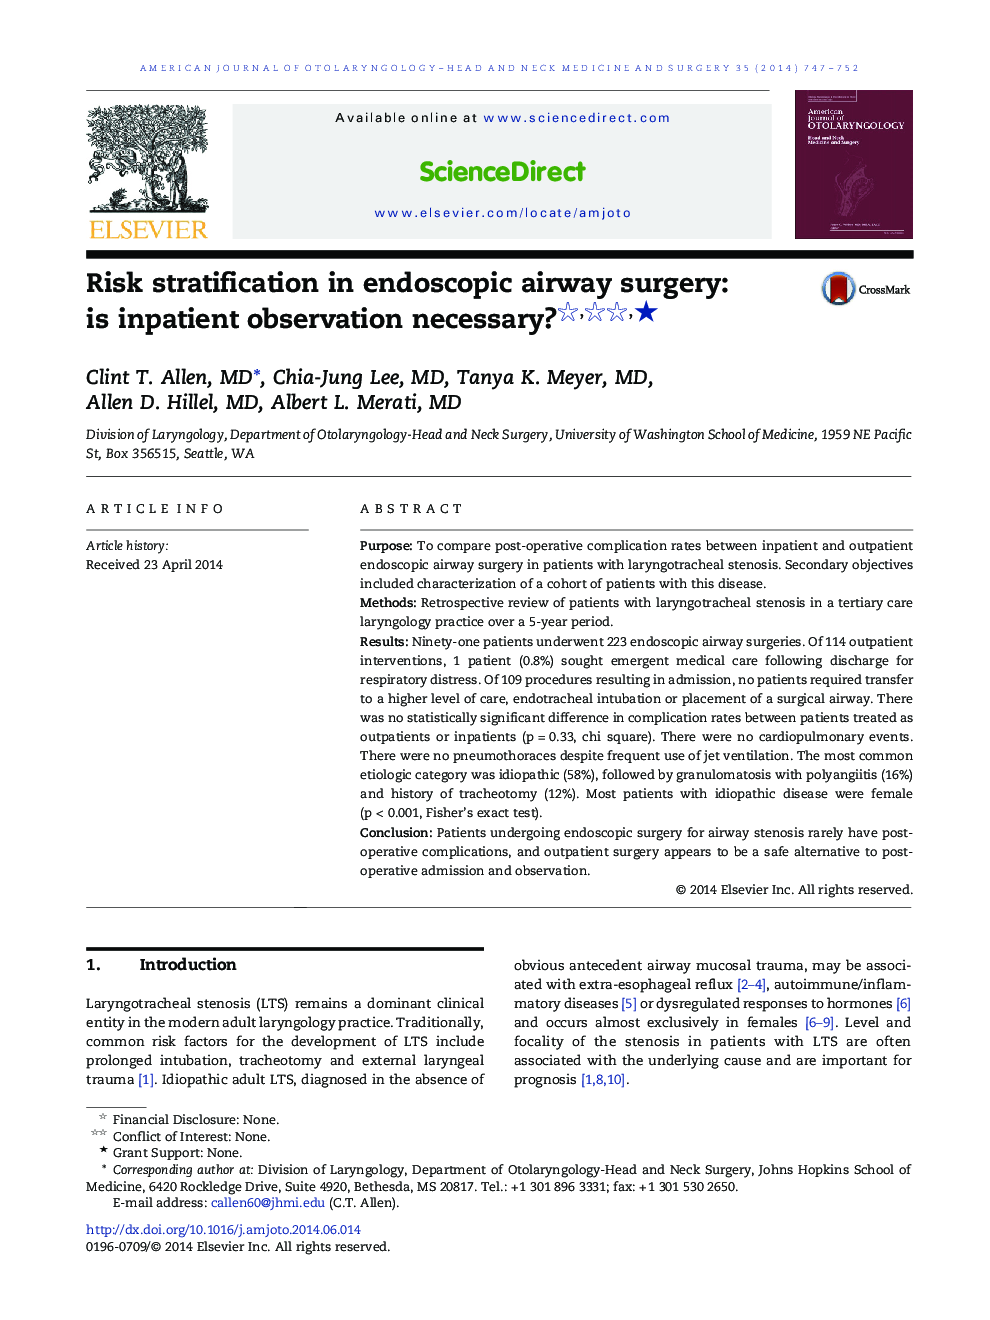 Risk stratification in endoscopic airway surgery: is inpatient observation necessary? ★